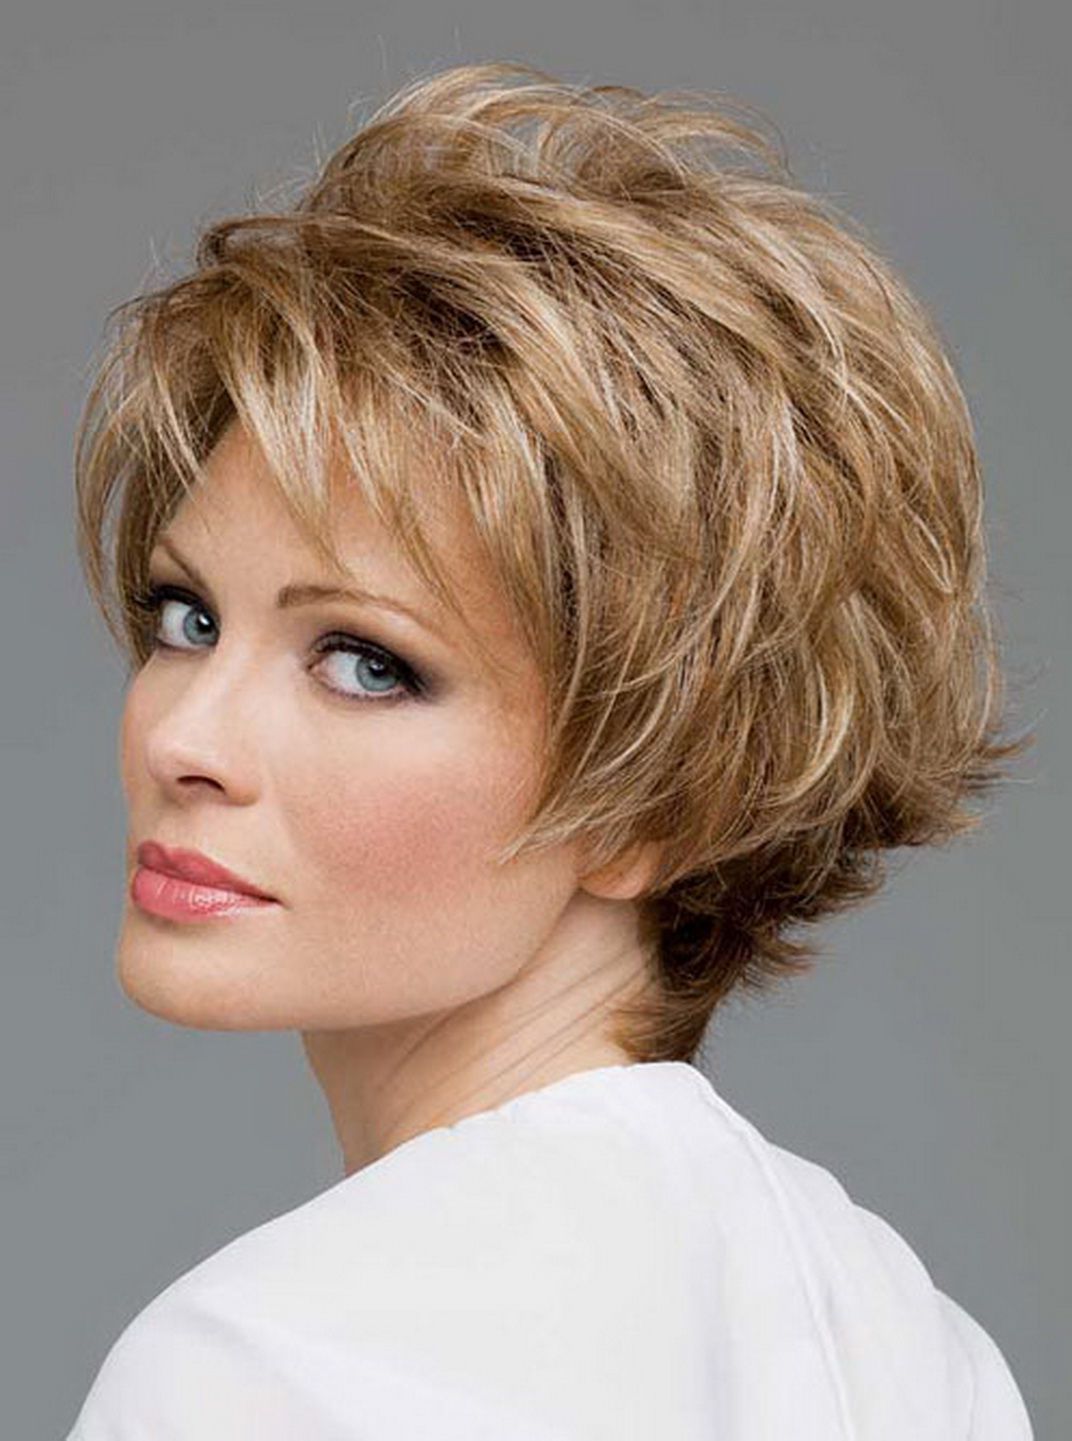 Edgy+hairstyles+for+over+60 | Trendy Short Hair Trends Haircuts For Throughout Short Hairstyles For Women With Fine Hair Over  (View 23 of 25)